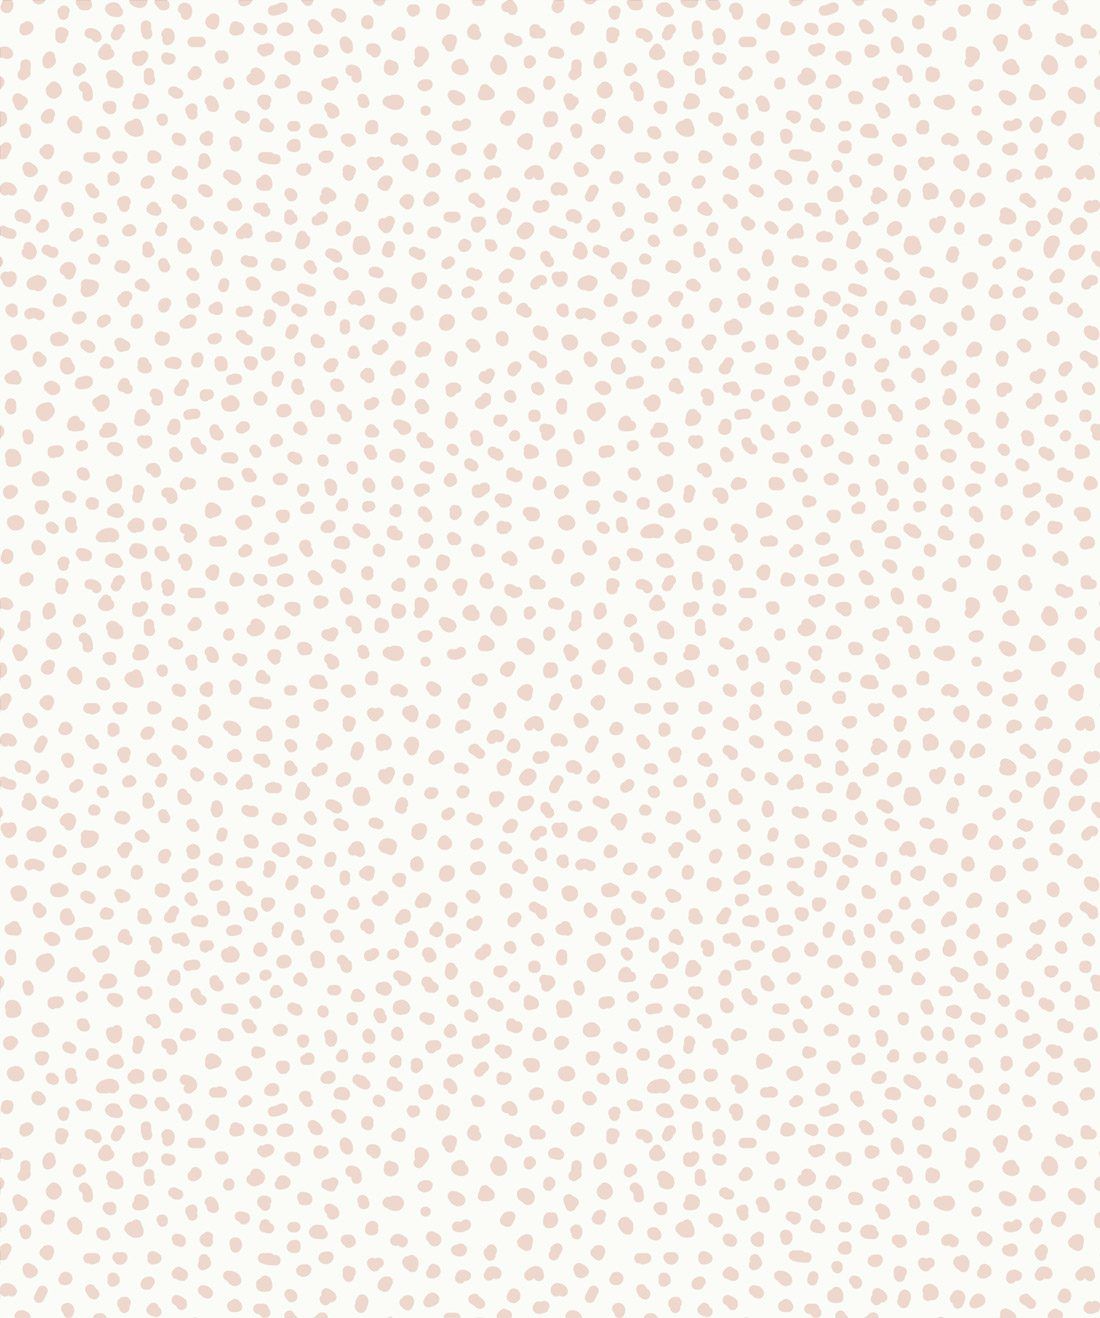 Huddy's Dots • Ella Rose • Spotted Wallpaper • Swatch